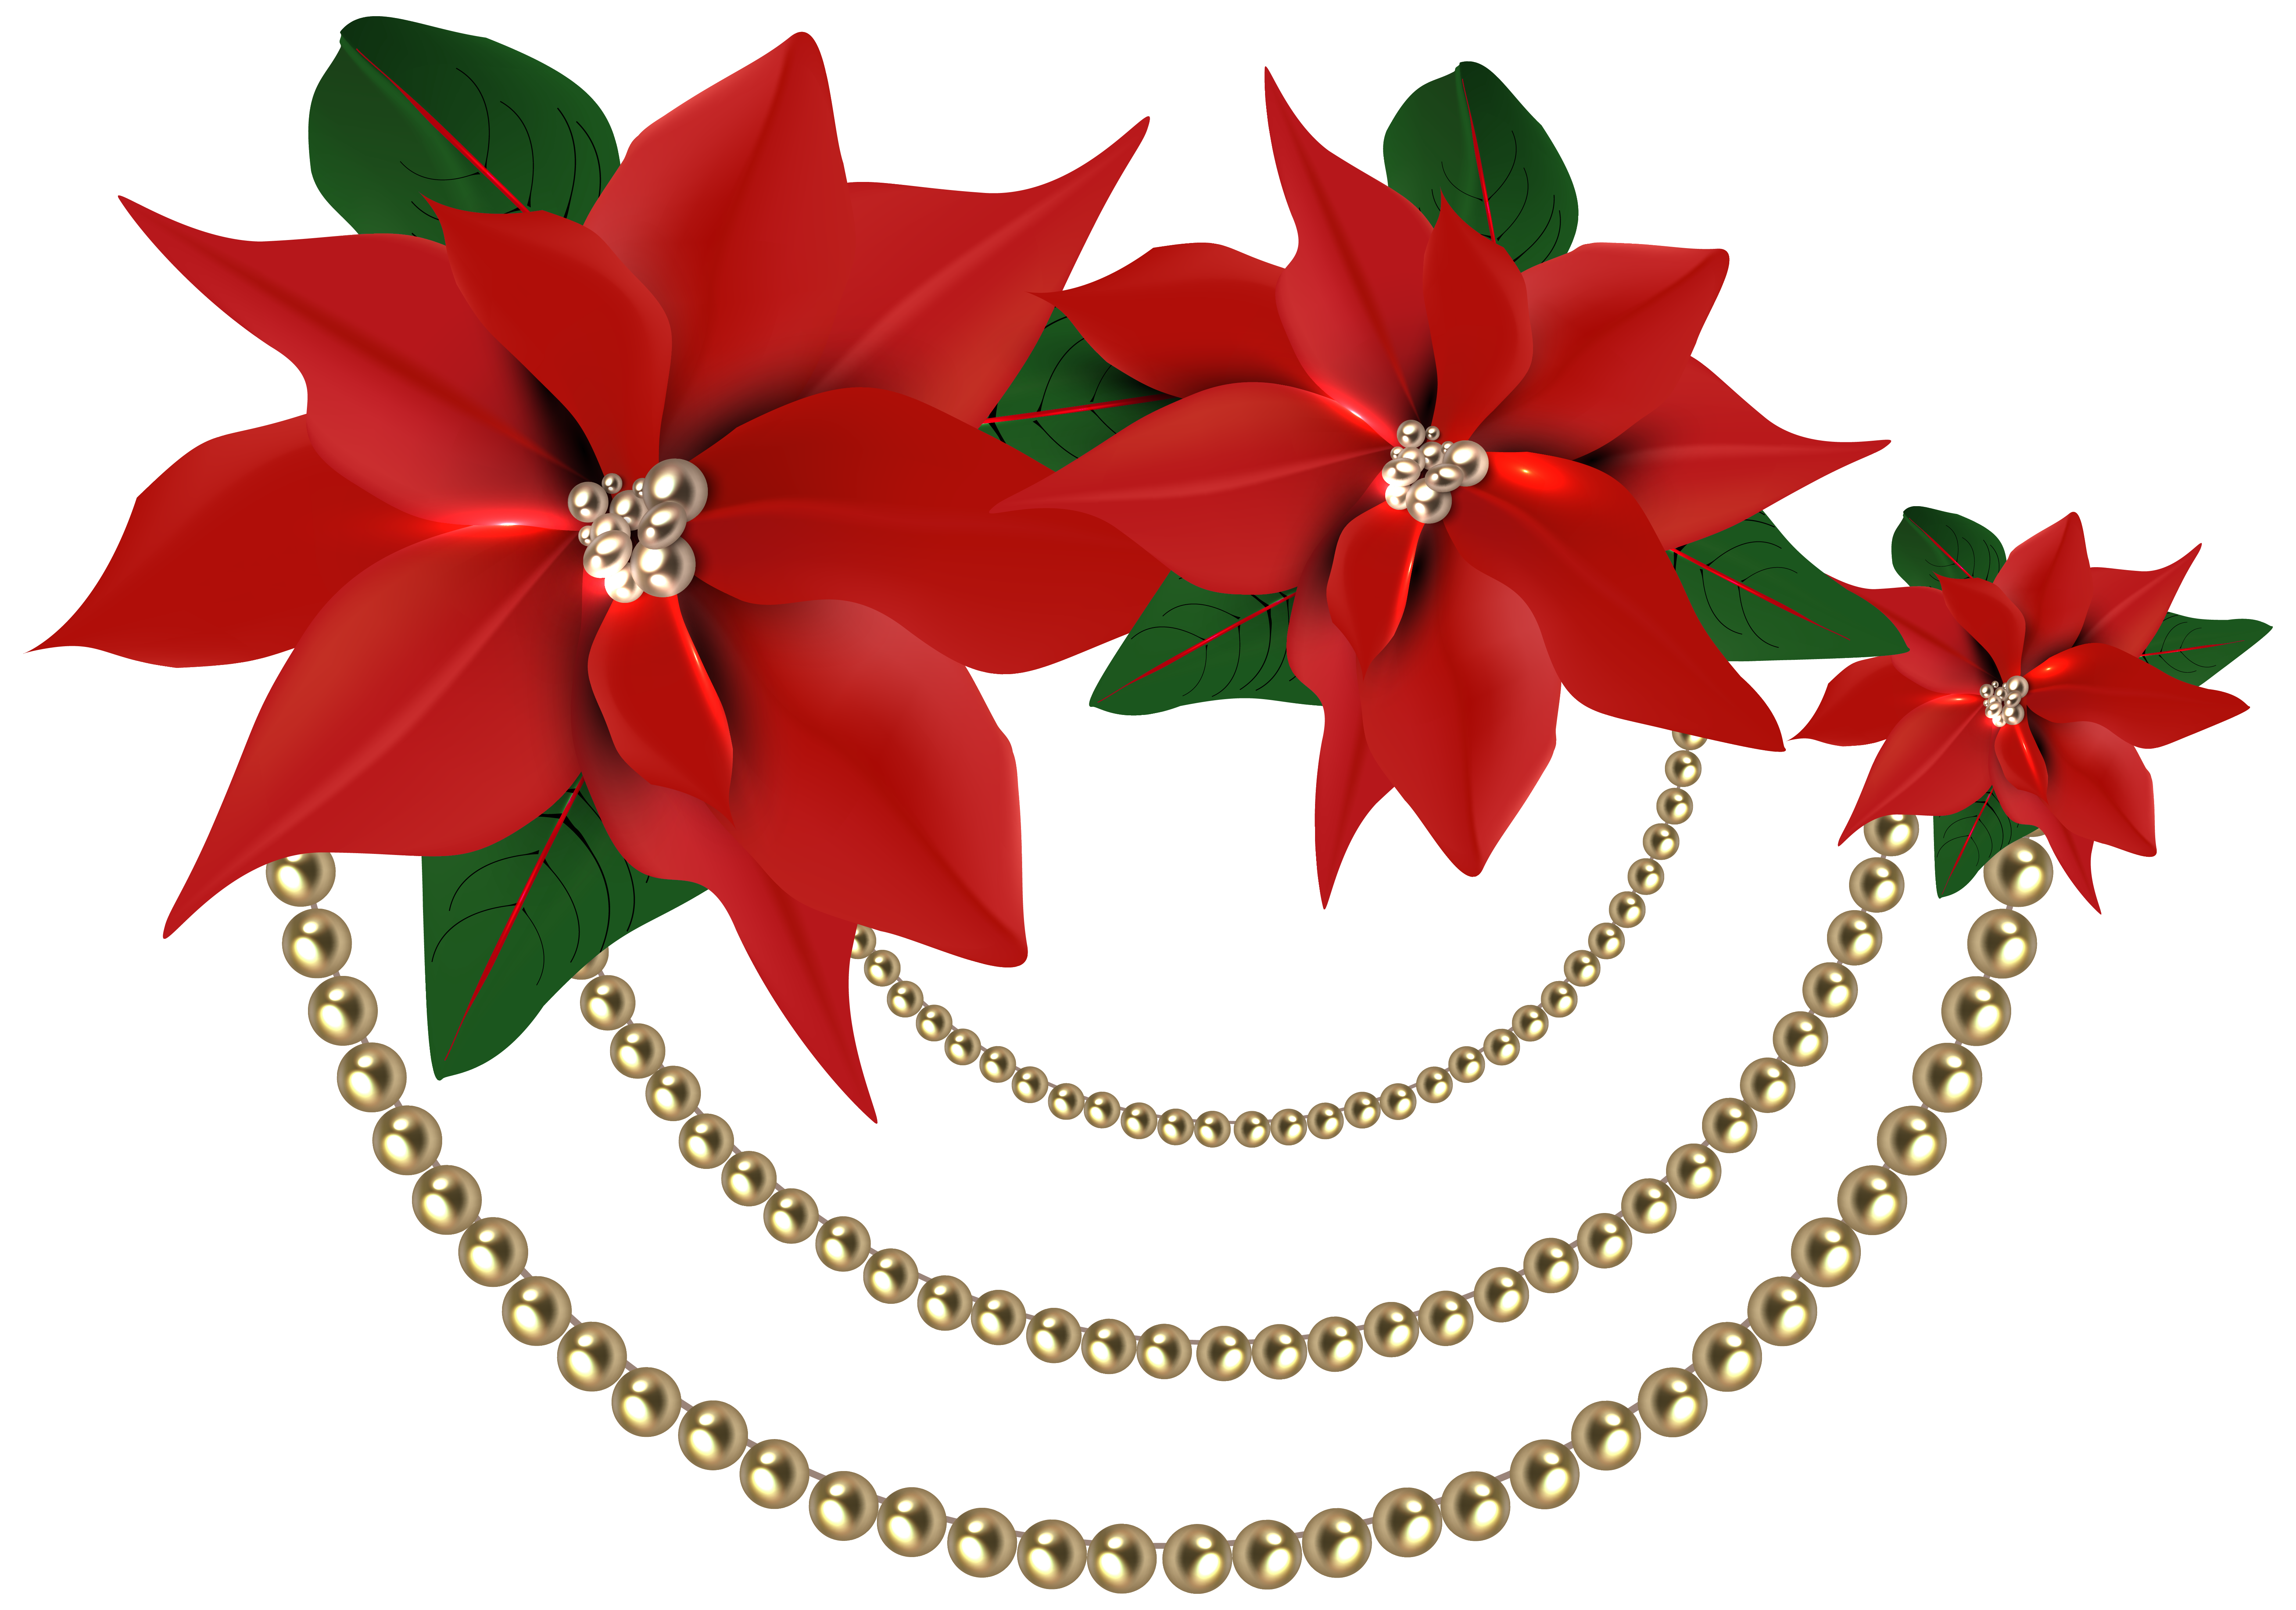 Decorative poinsettias with pearls. Clipart rose christmas